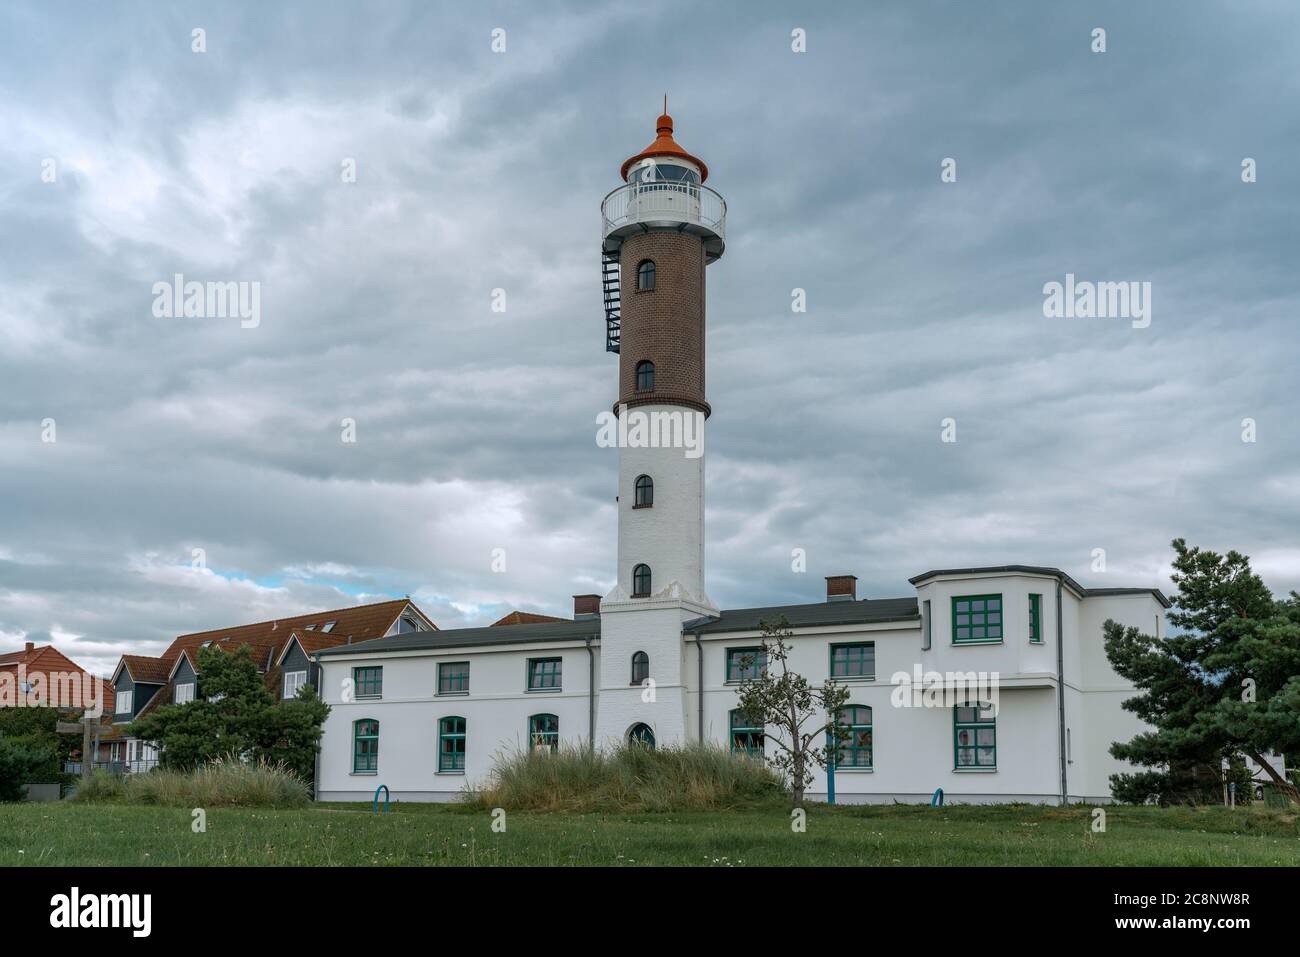 Lighthouse at Timmendorf on Poel island at the baltic sea Stock Photo